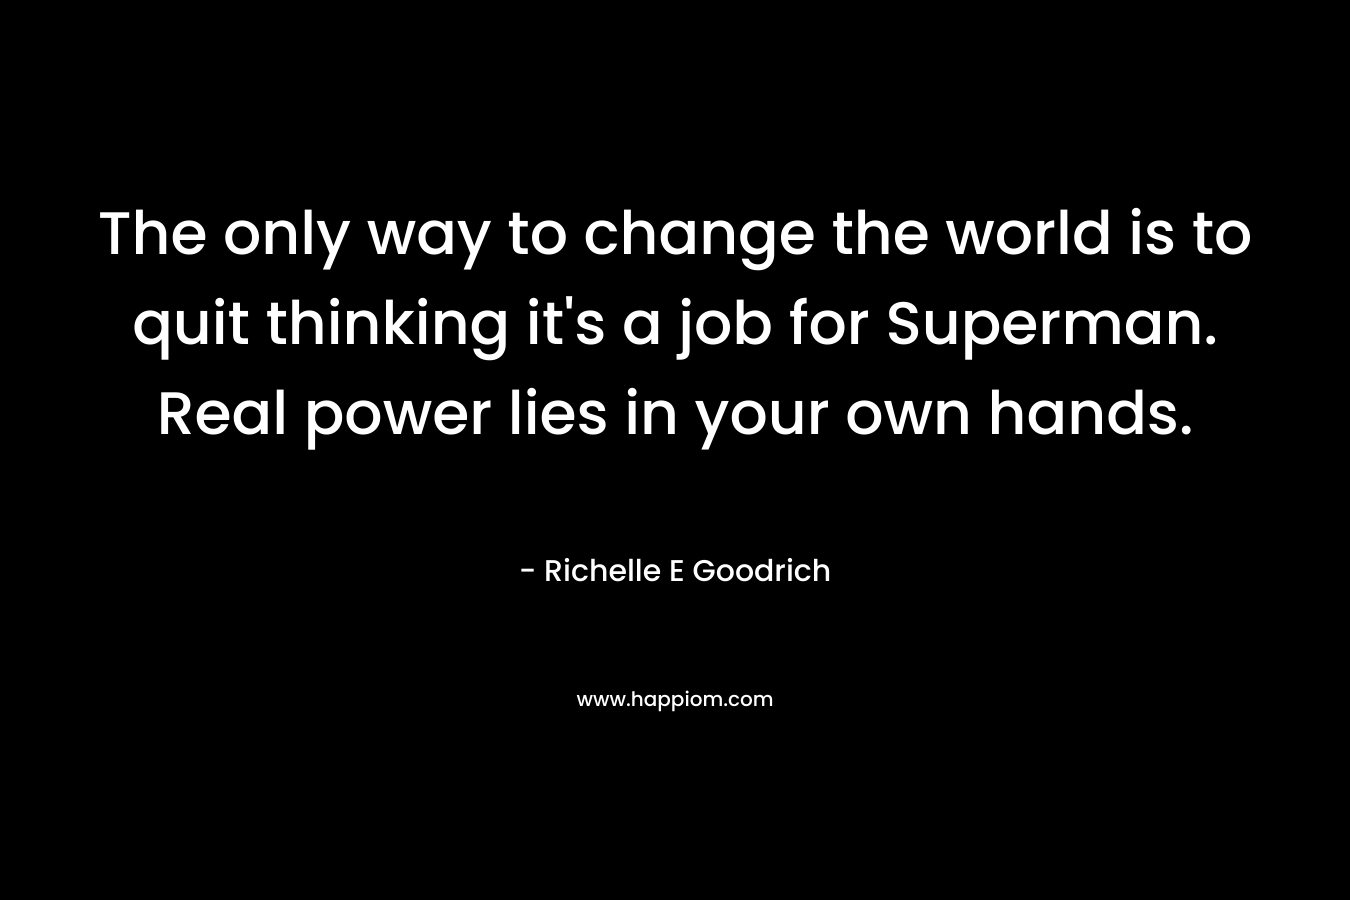 The only way to change the world is to quit thinking it's a job for Superman. Real power lies in your own hands.